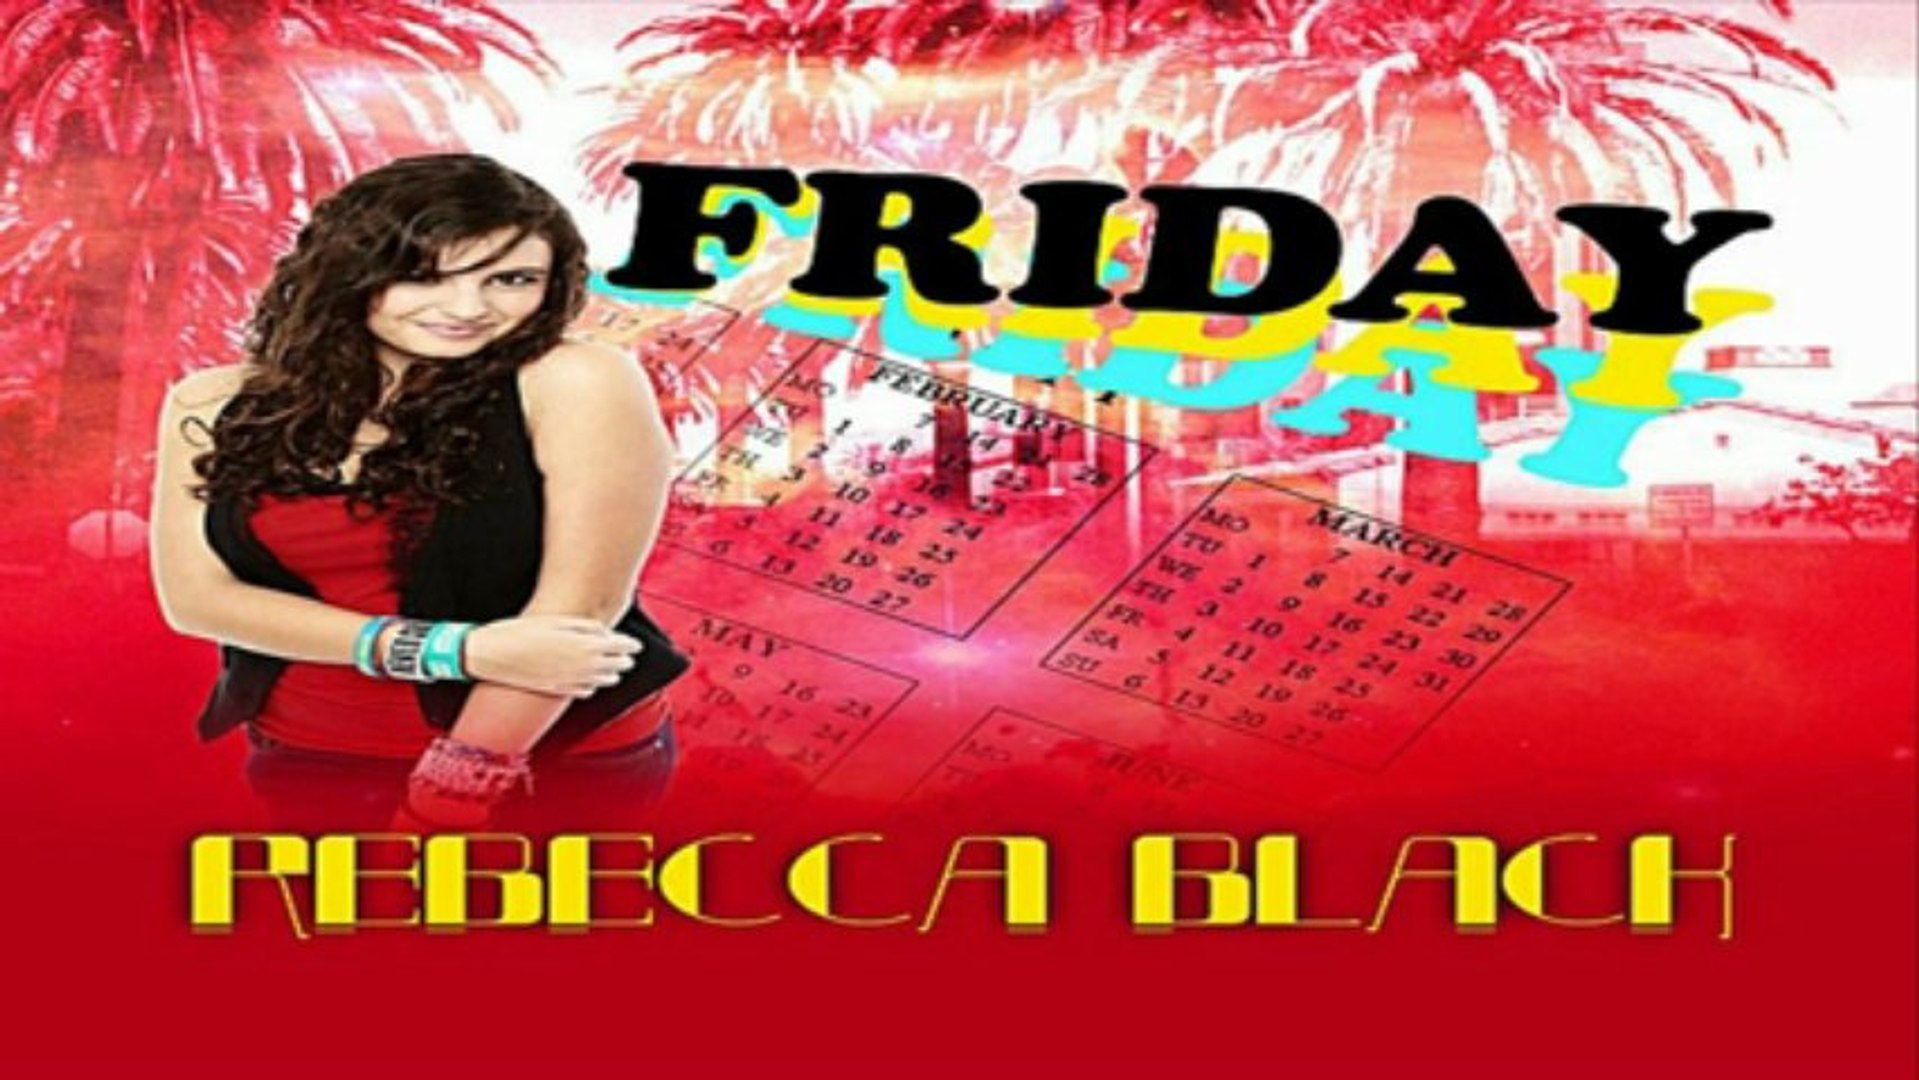 DOWNLOAD MP3 ] Rebecca Black - Friday [ iTunesRip ] - video Dailymotion